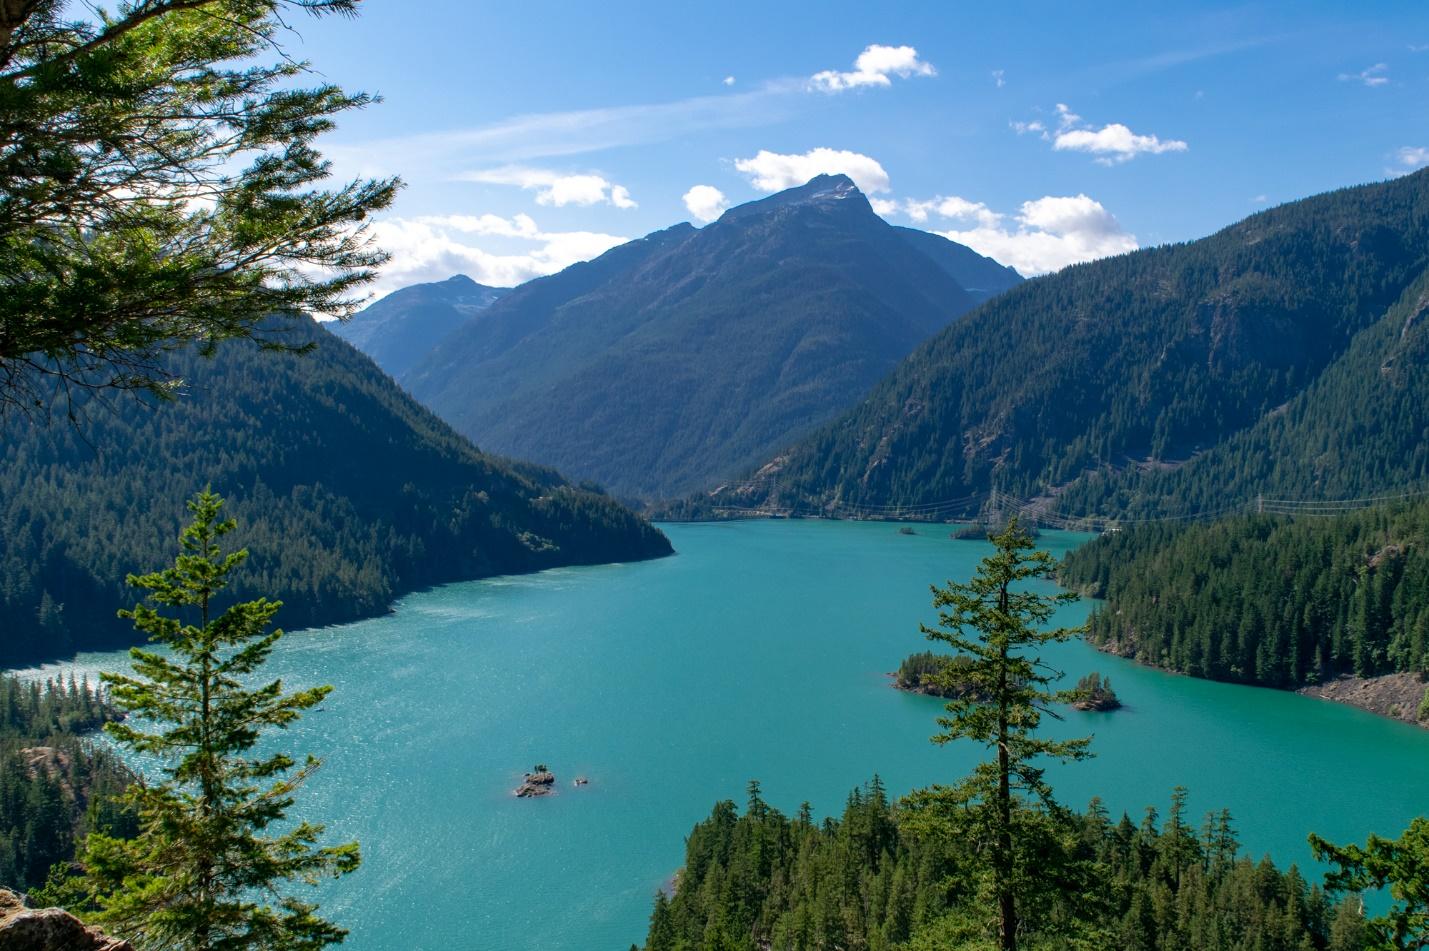 A body of water with trees and mountains in the background - Places to Visit in the Pacific Northwest